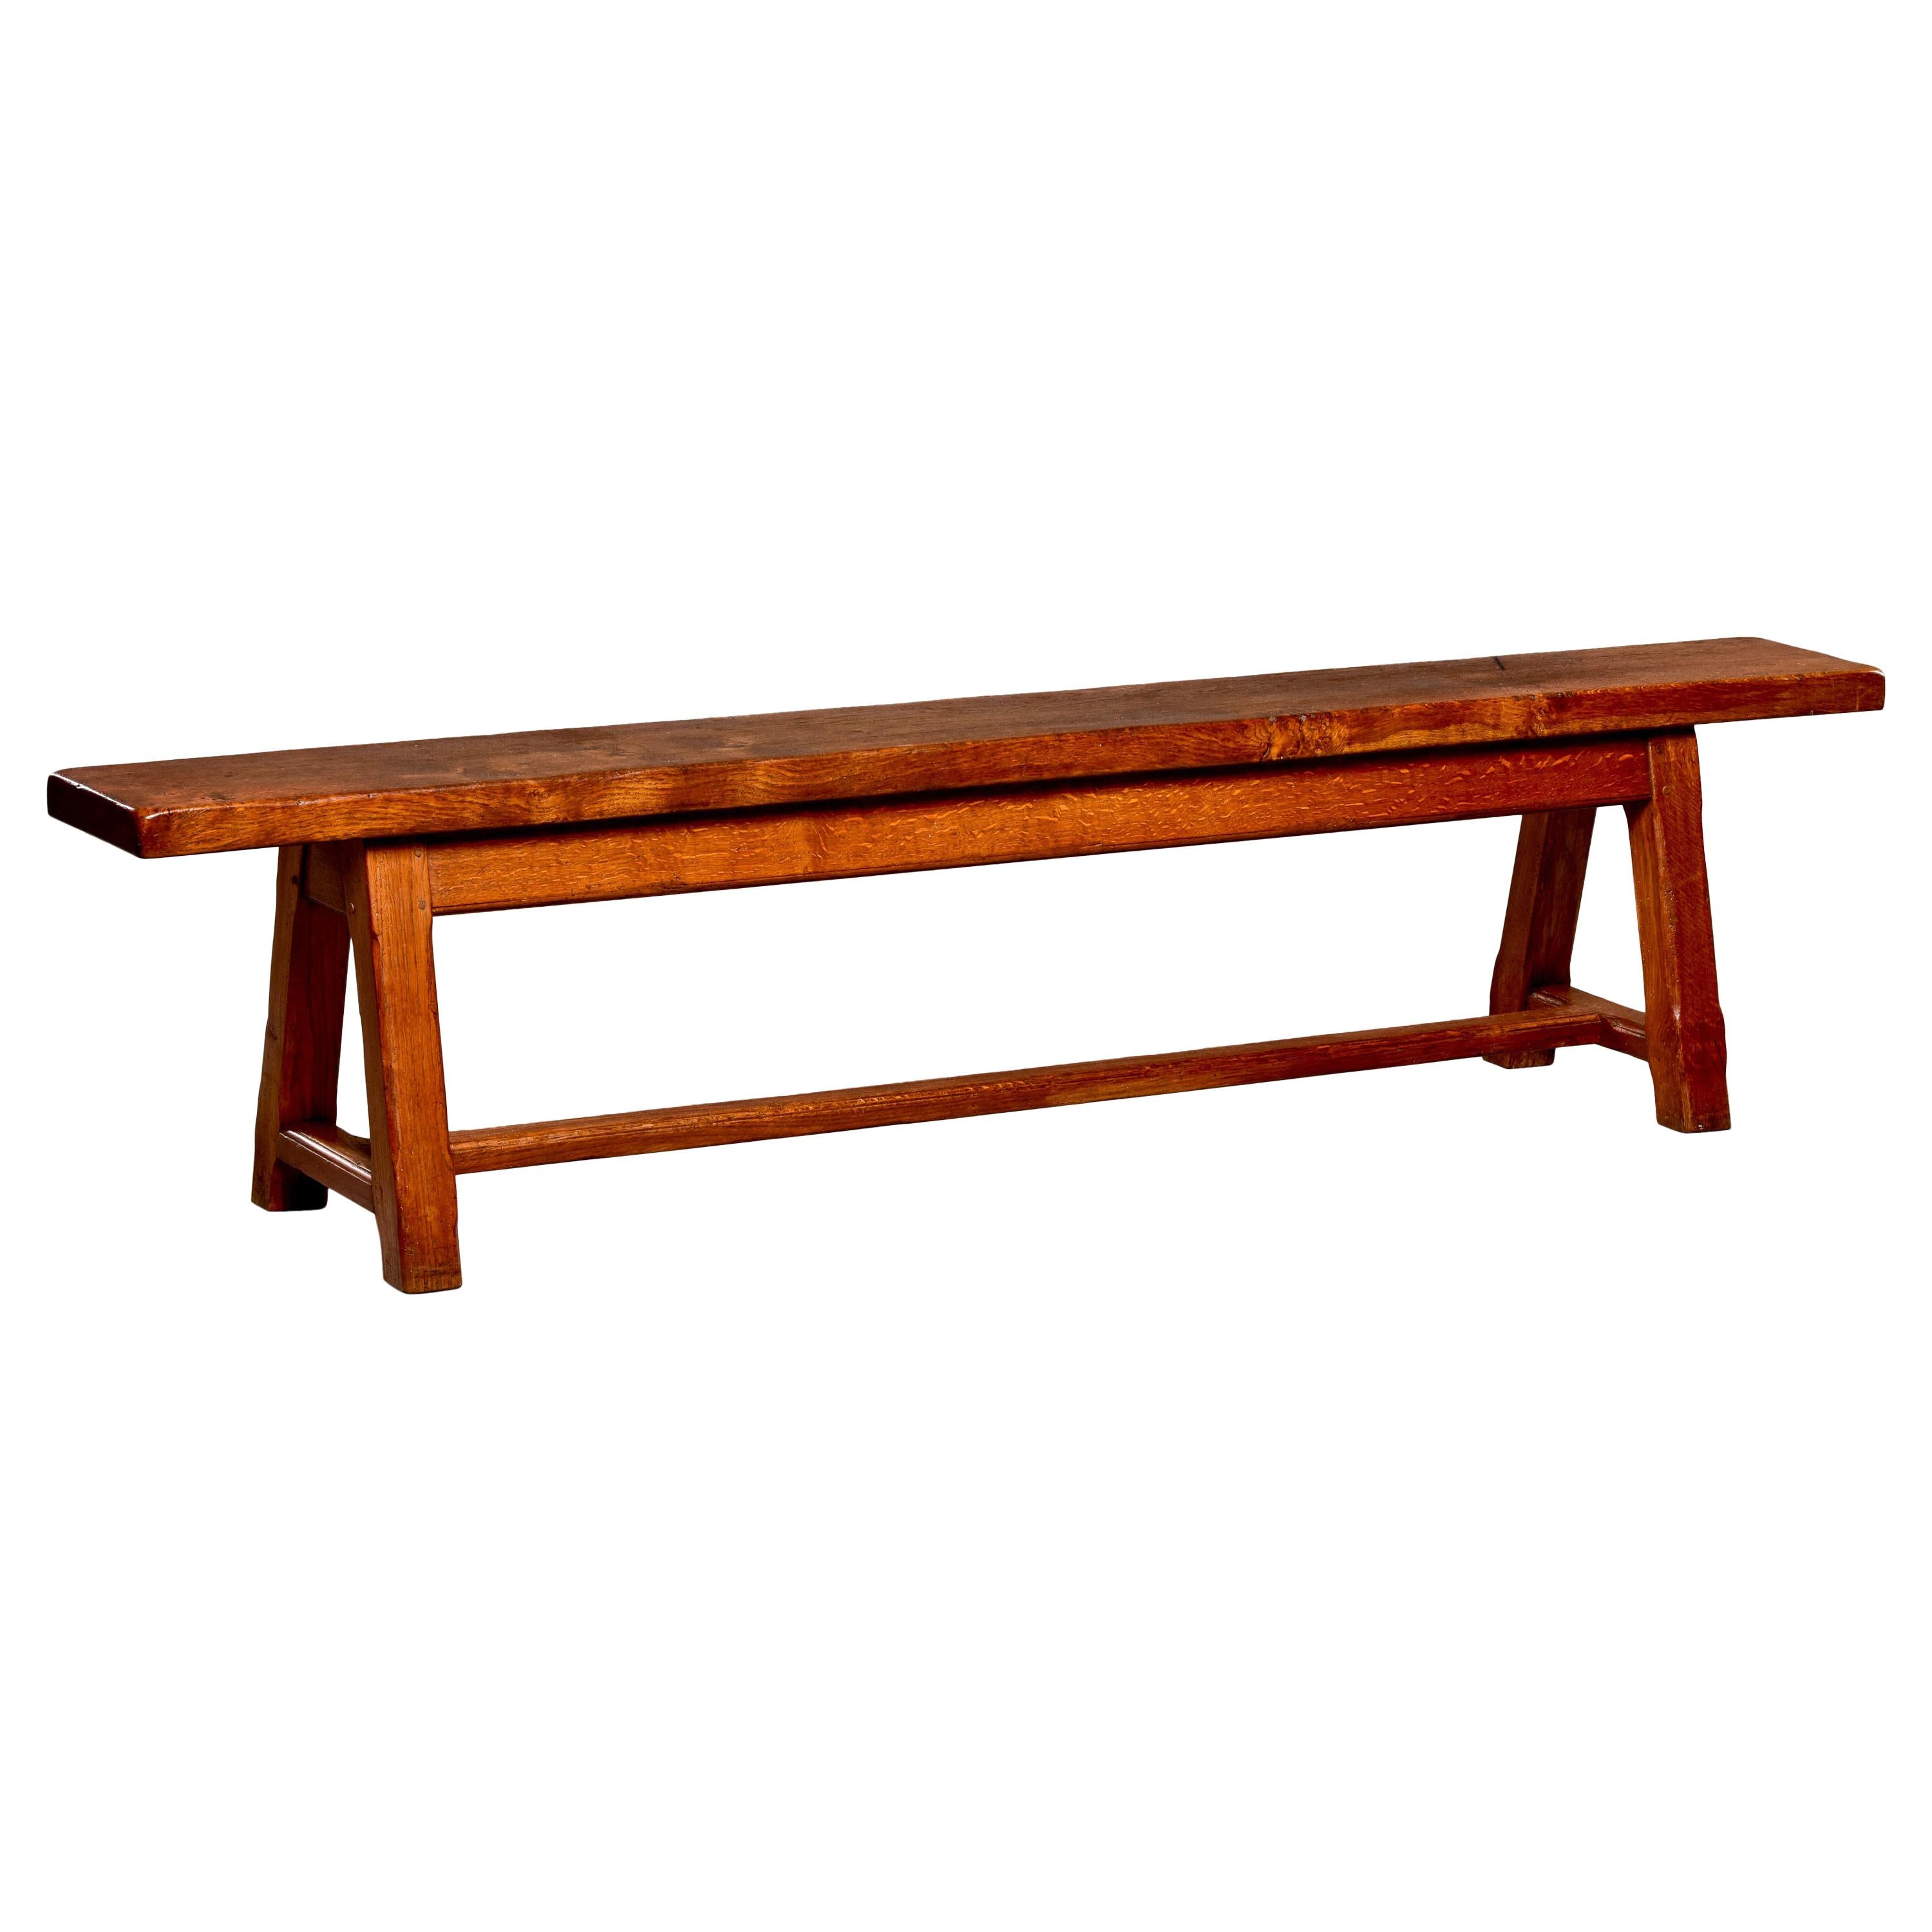 French 19th C Long Narrow Primitive Wood Bench